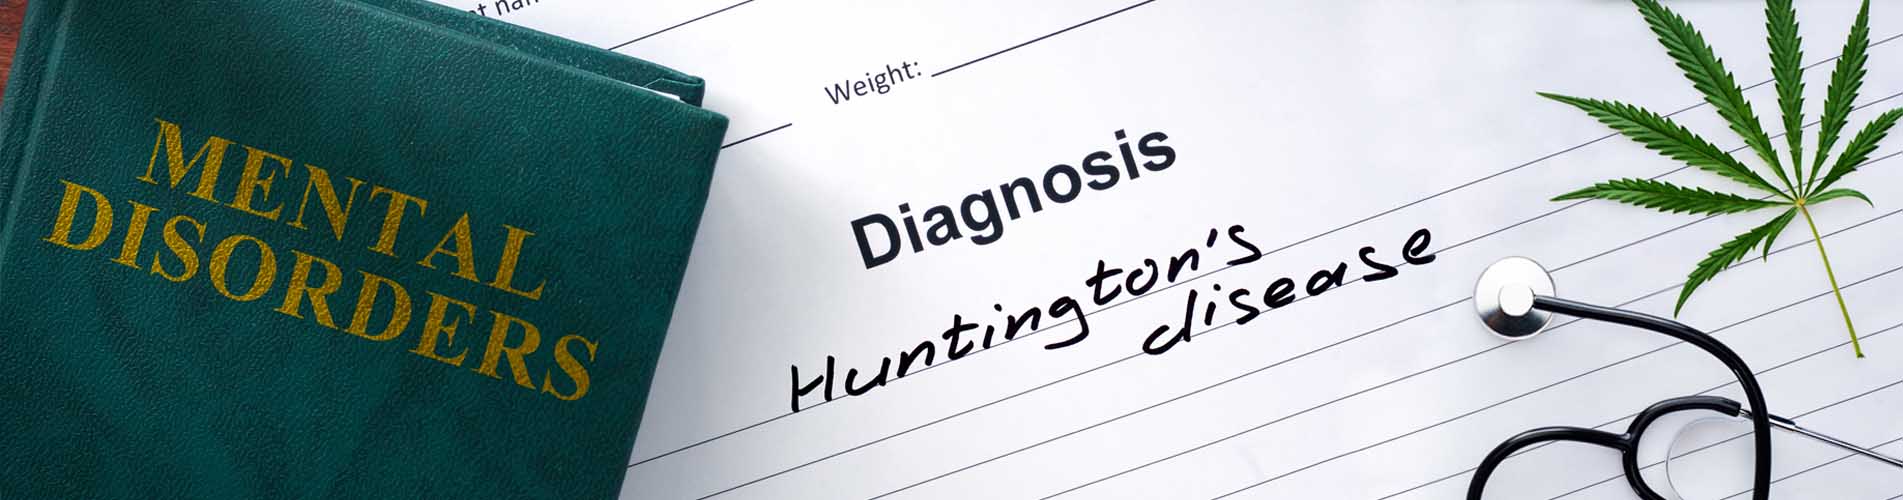 Using Cannabis for Huntington's Disease: Is It Going to Help?